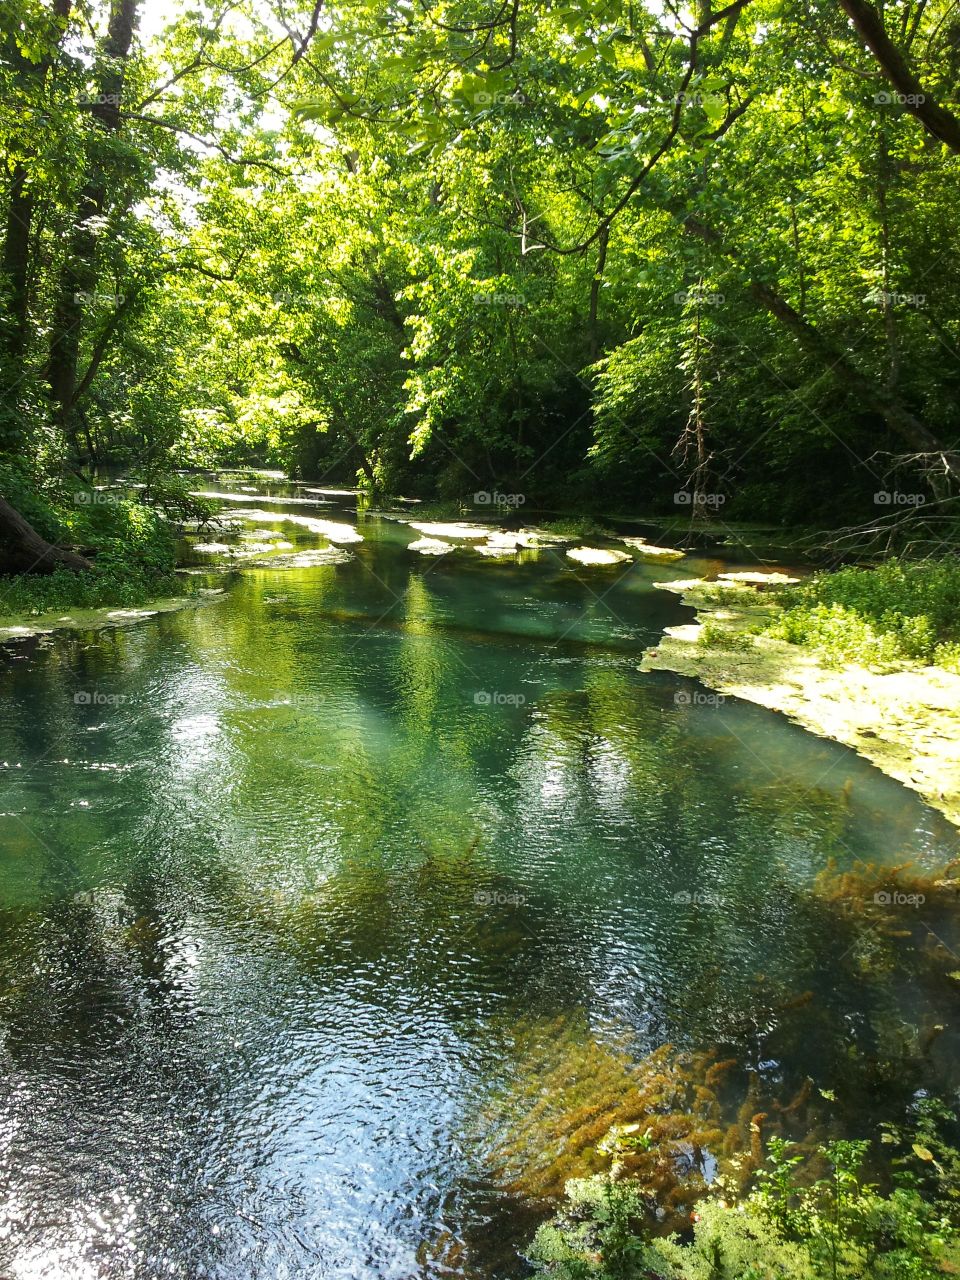 Upper Althea Springs on the North Fork River, Missouri.